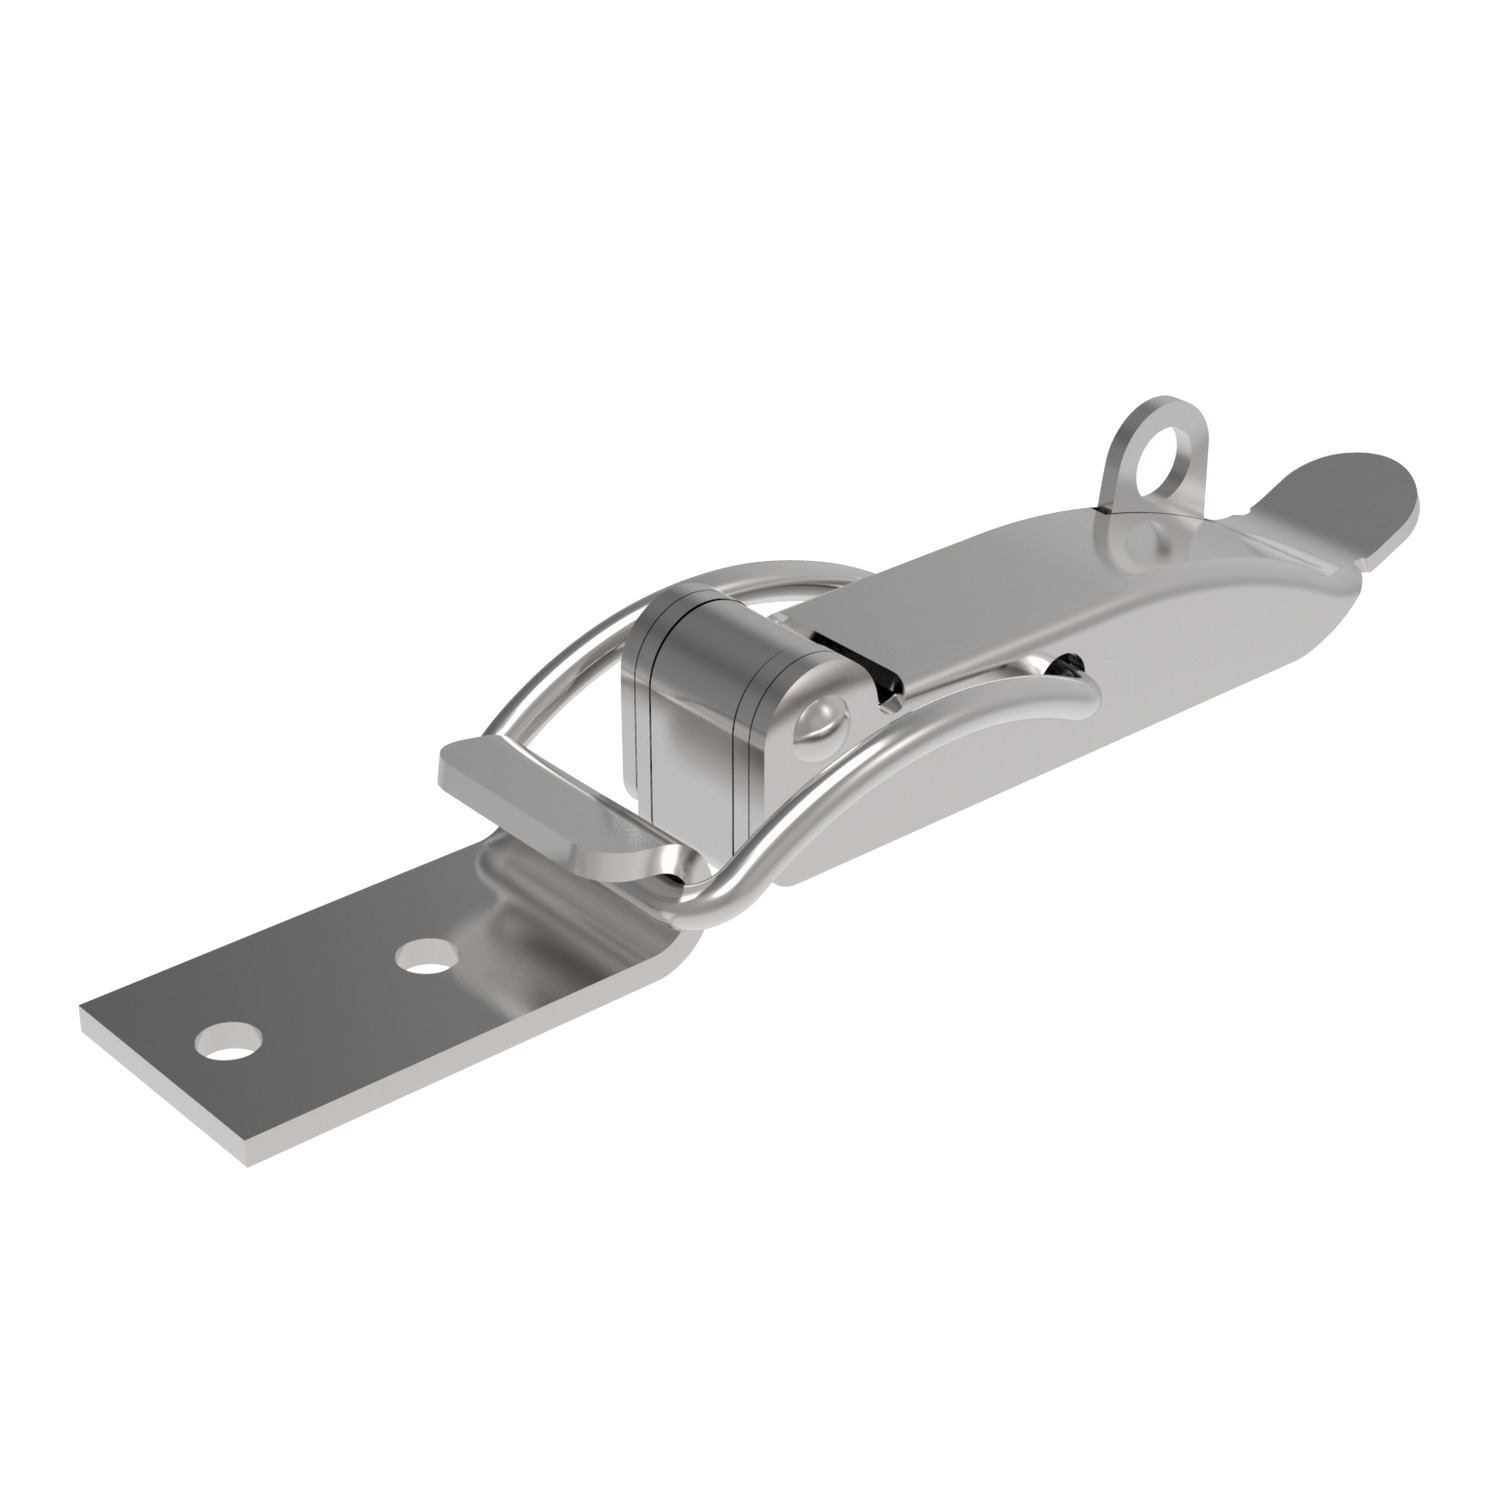 J0552.AC0030 Toggle Latches - Steel or SS. Stainless steel